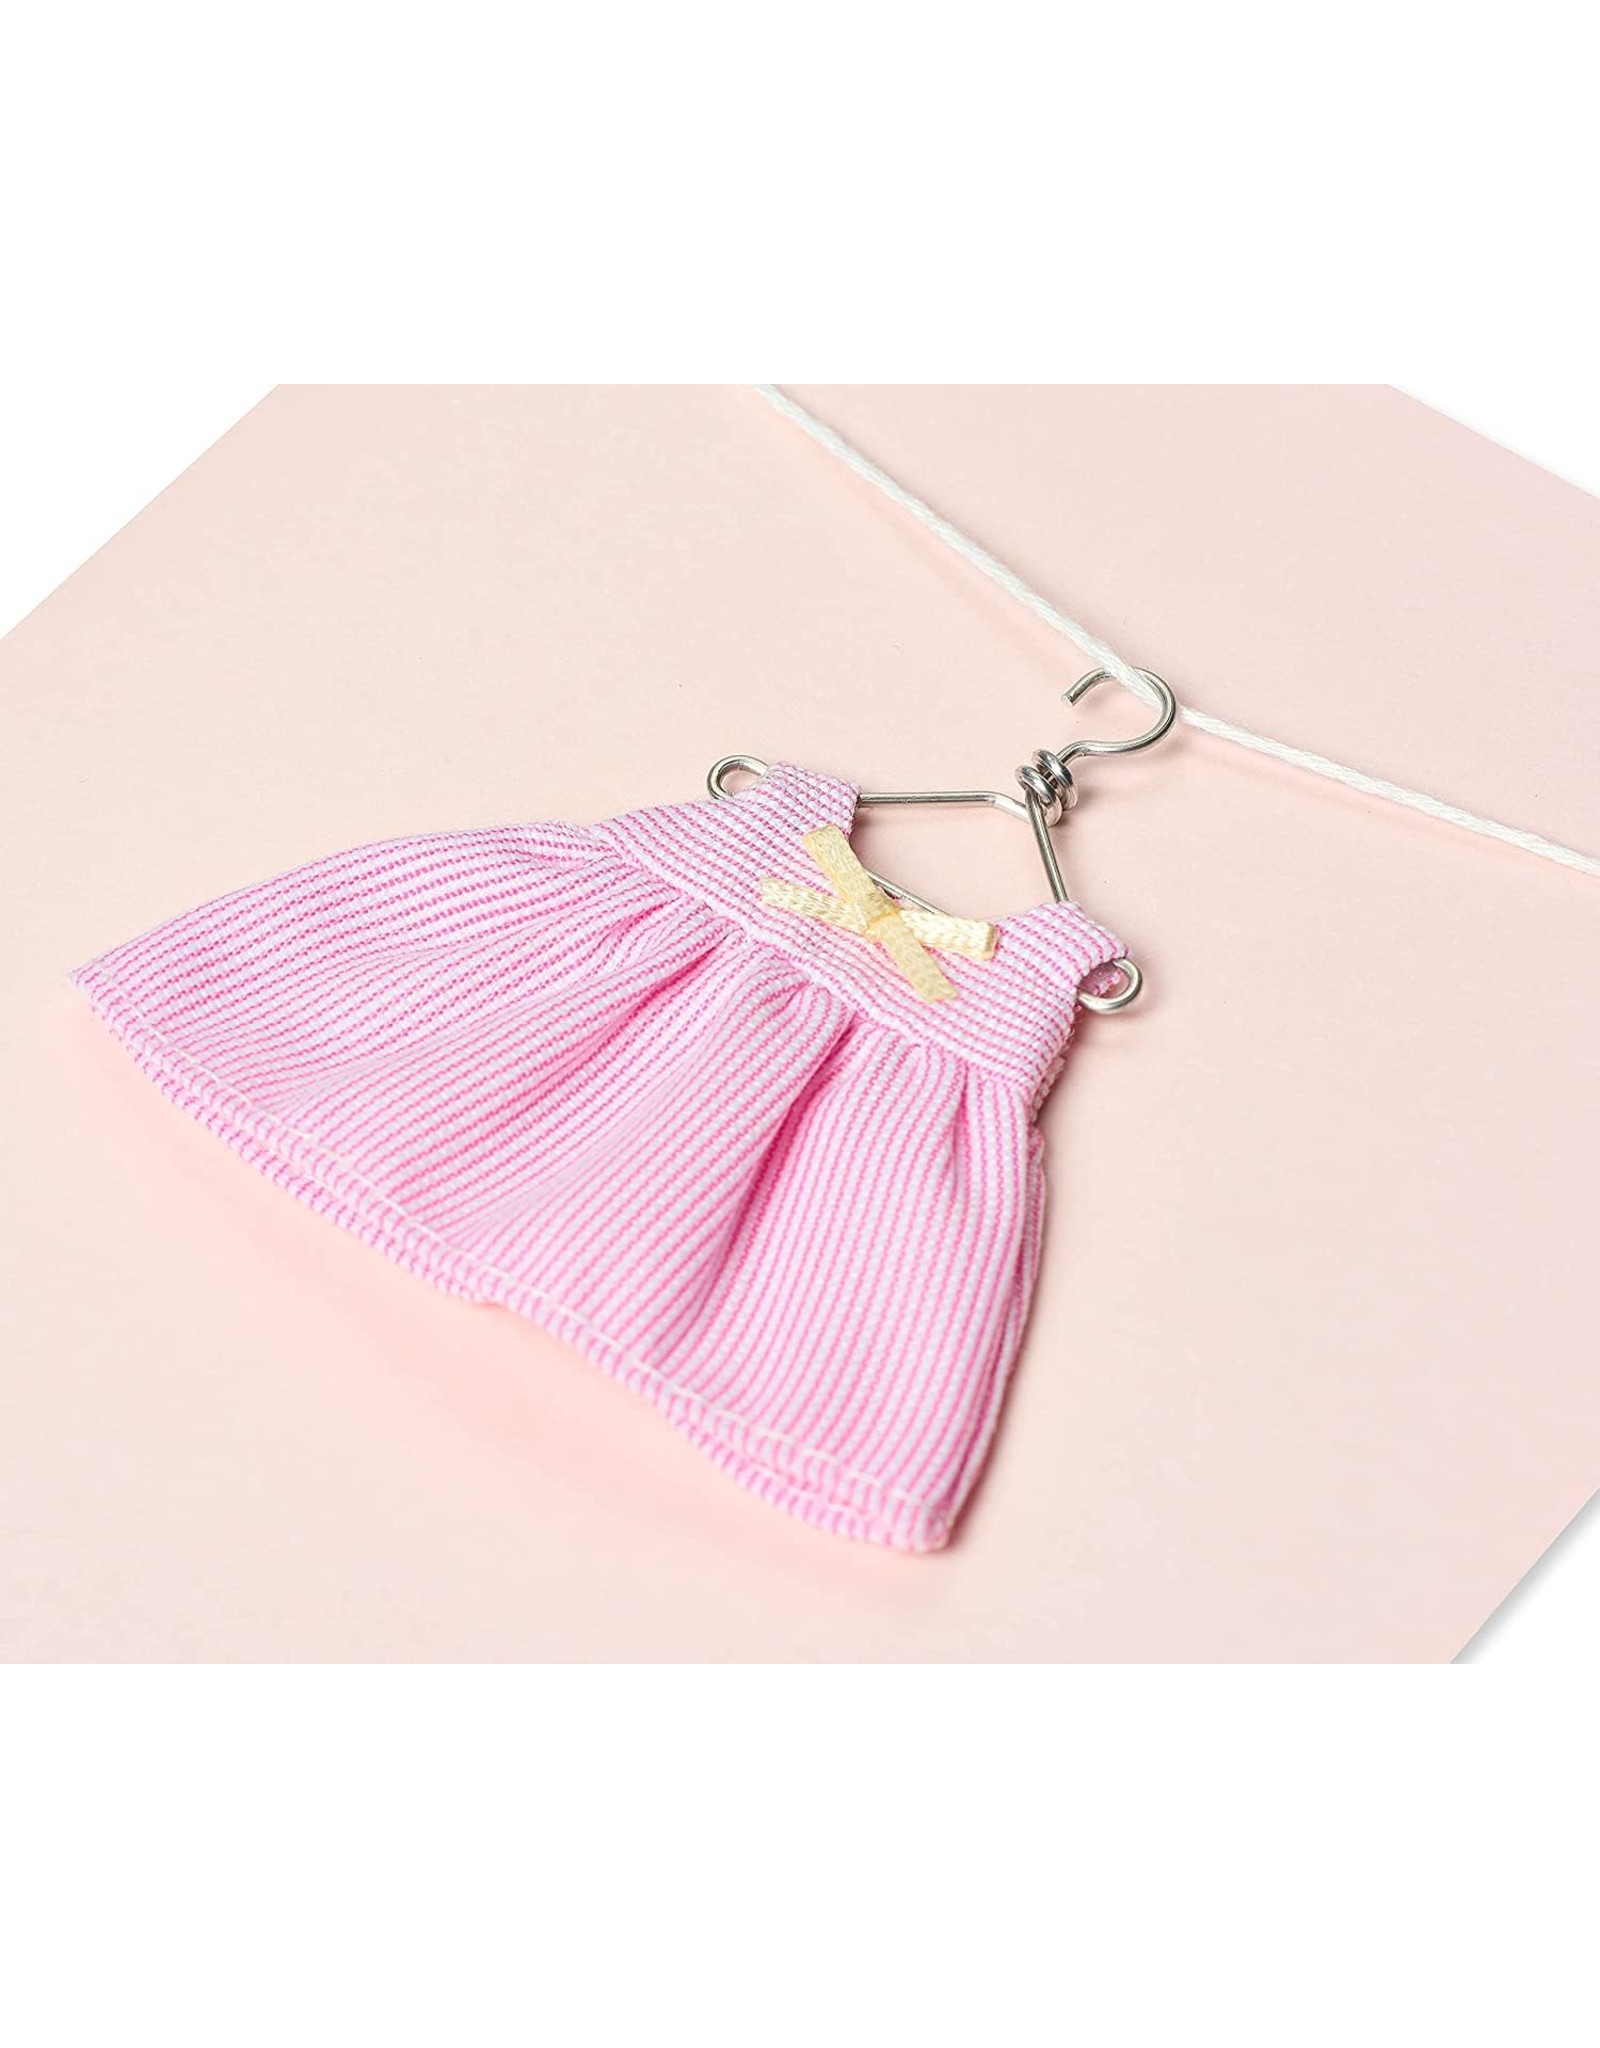 PAPYRUS® New Baby Card Pink Dress On Hanger New Baby Girl